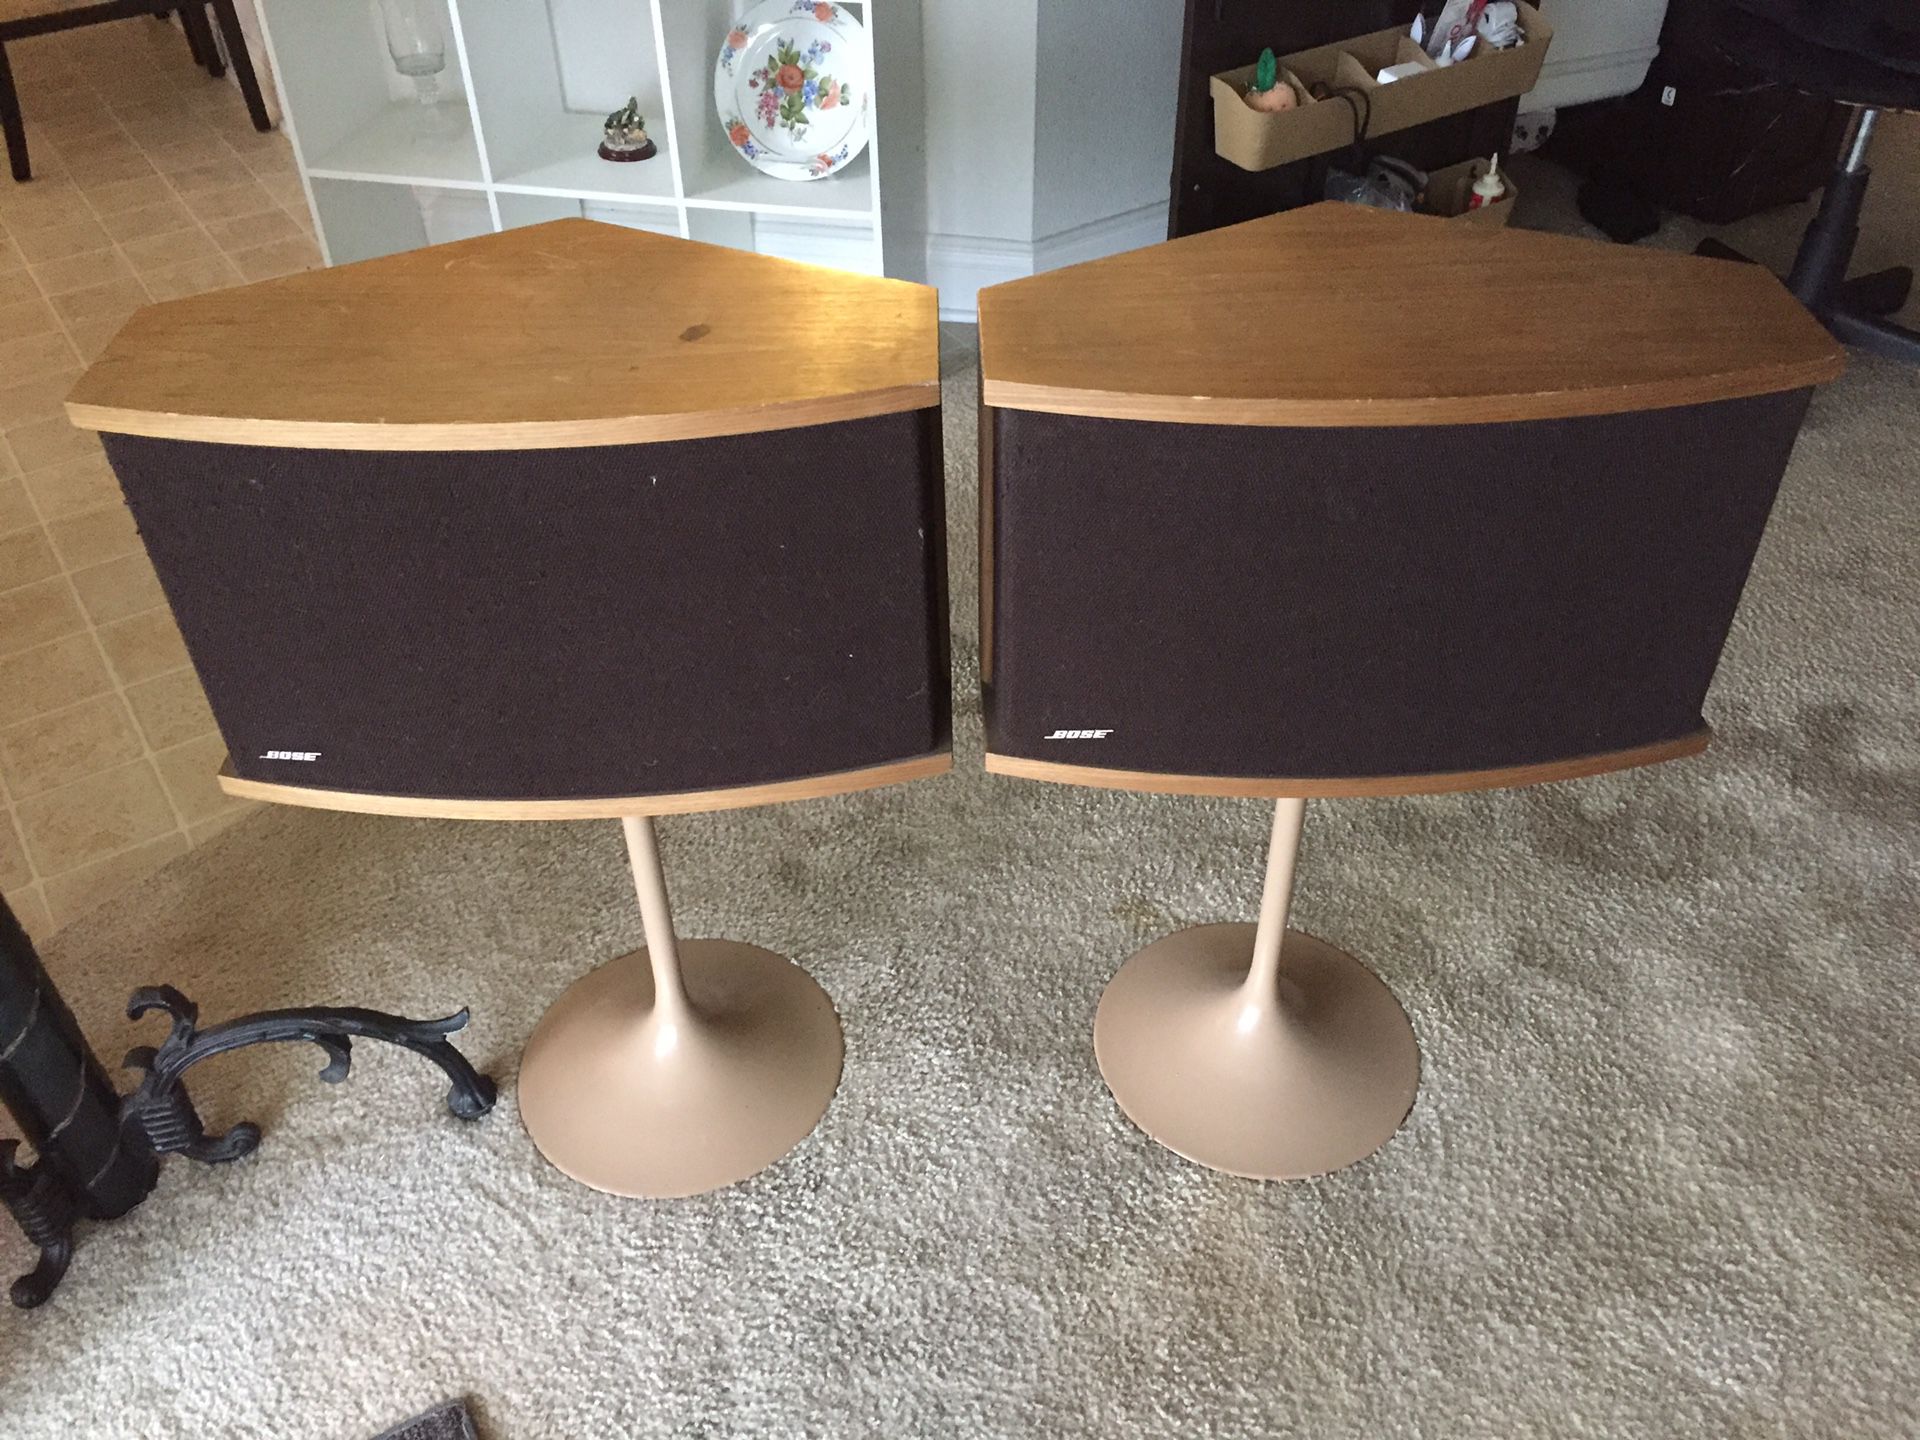 Bose 901 Series VI Speakers and Equalizer + Stands